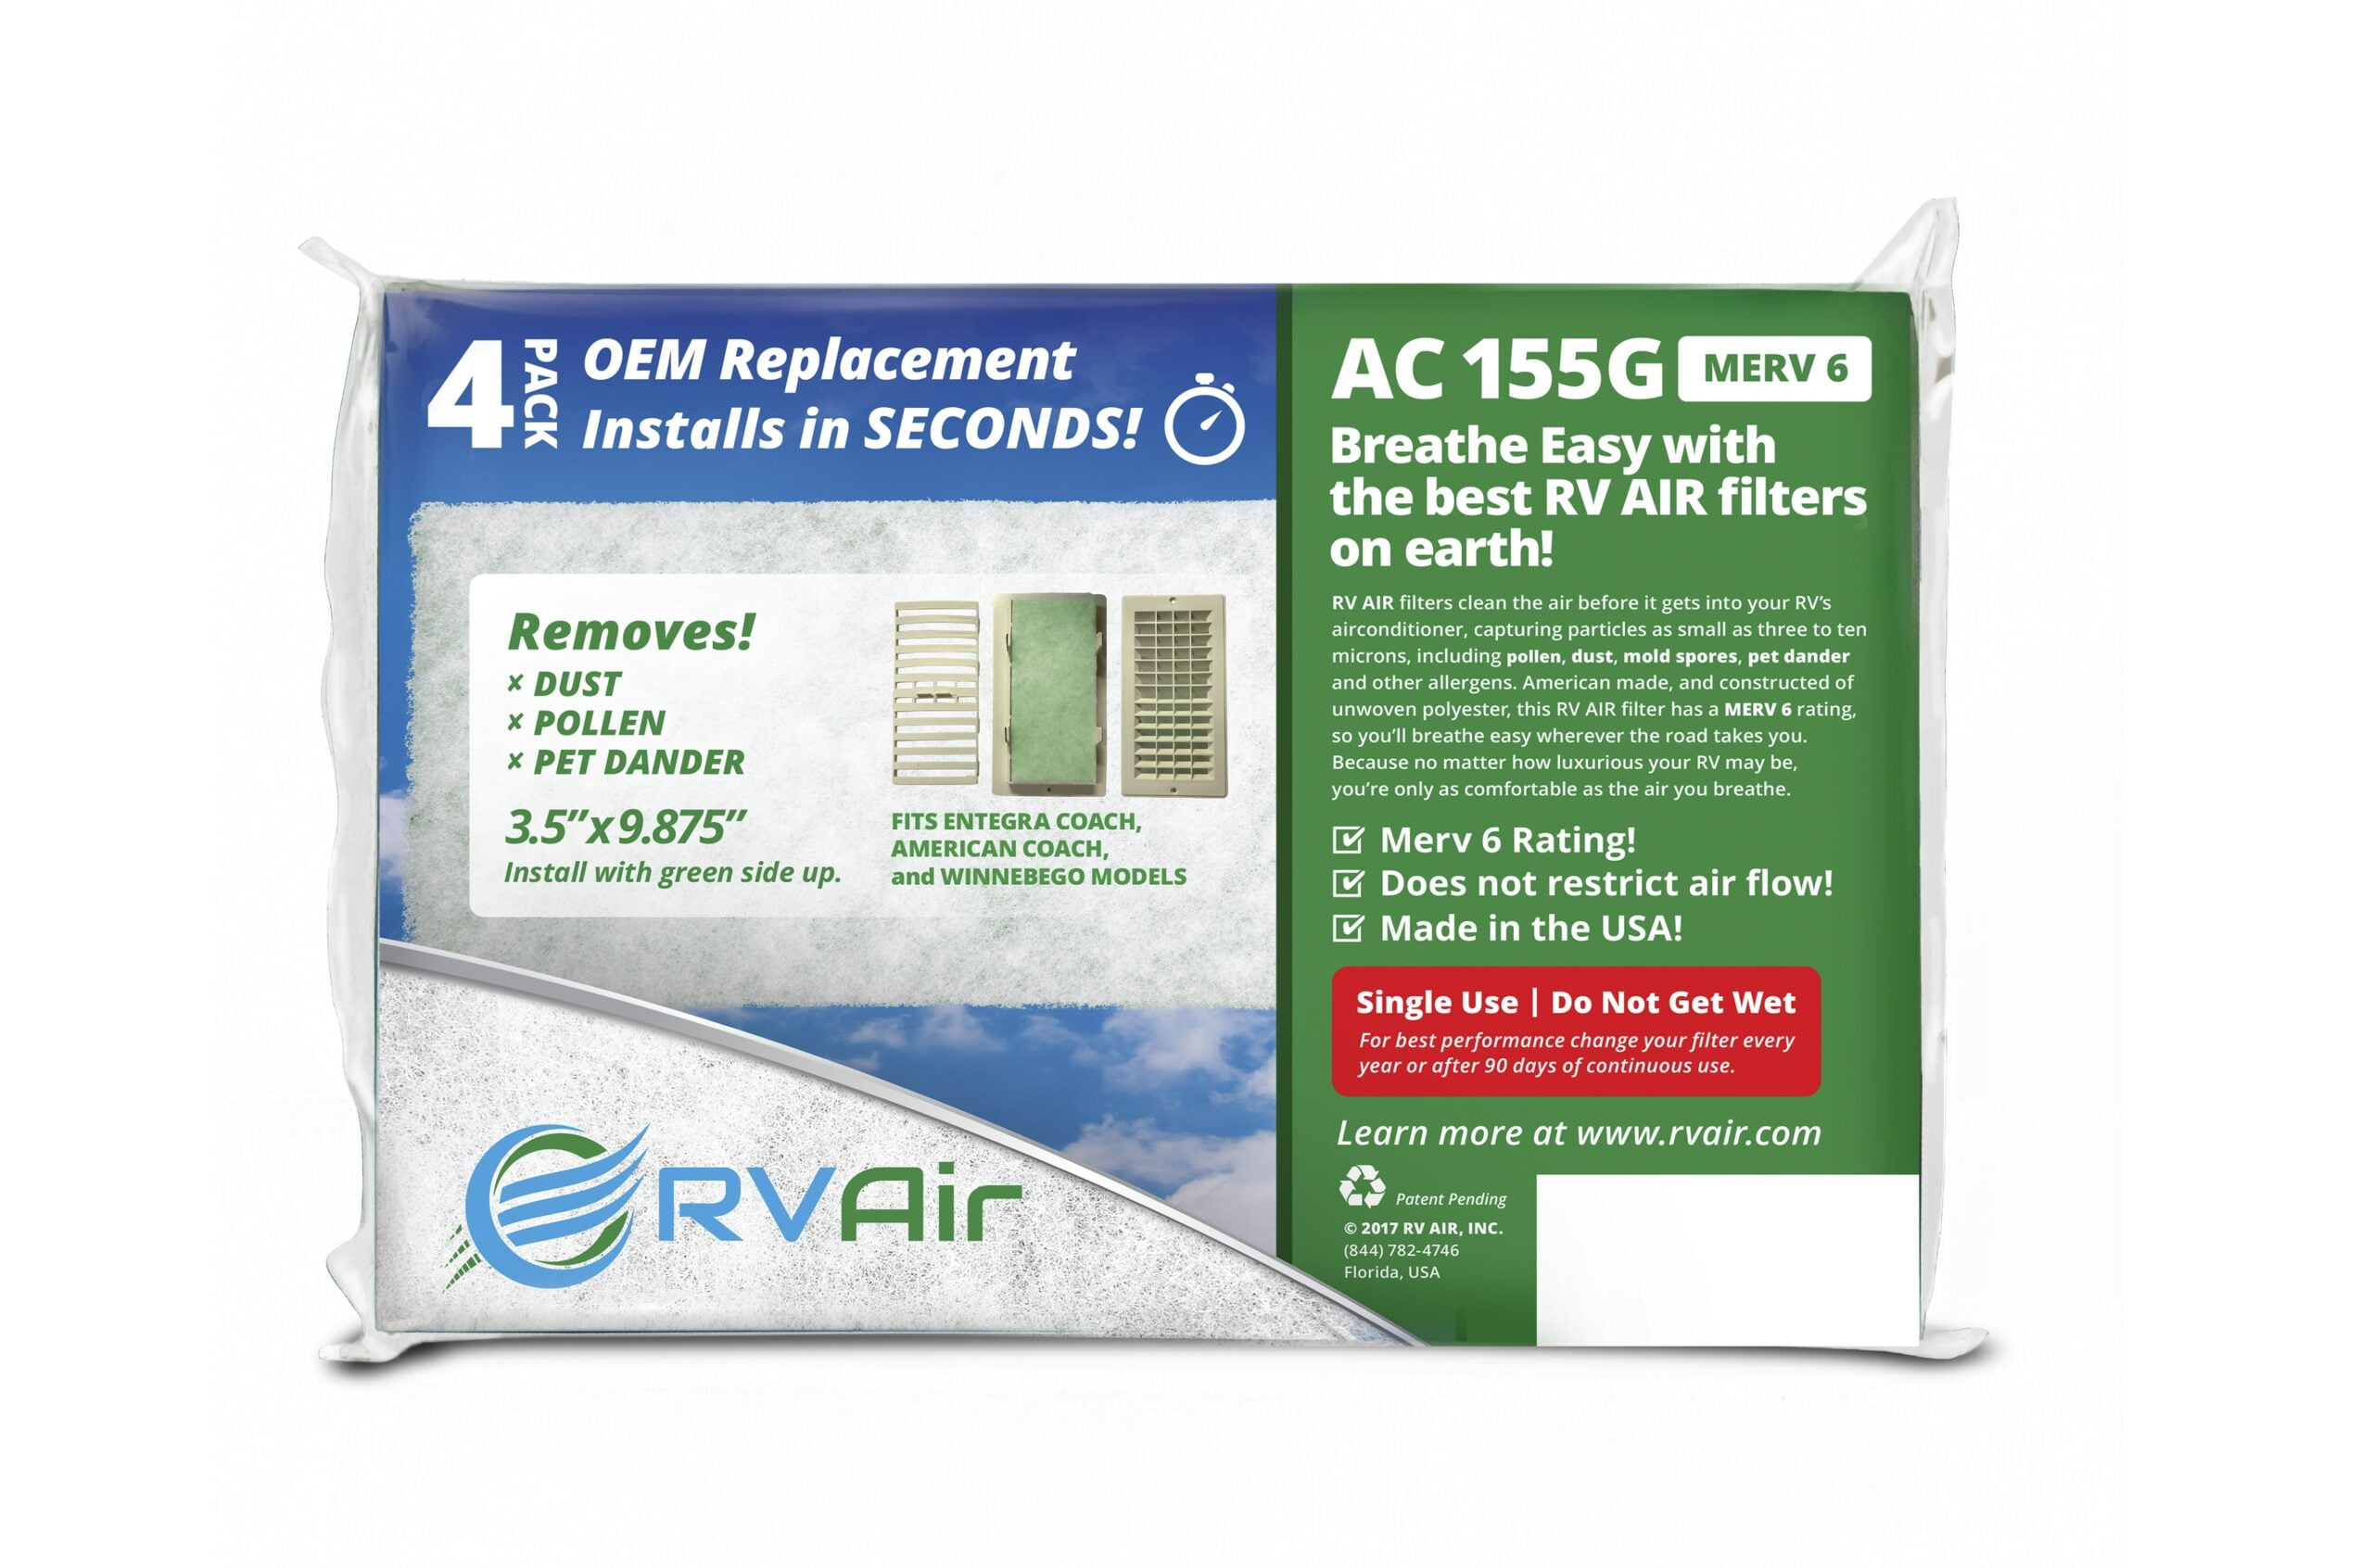 RV Air AC155G Air Conditioner Filter Replacement, 4 Filters included